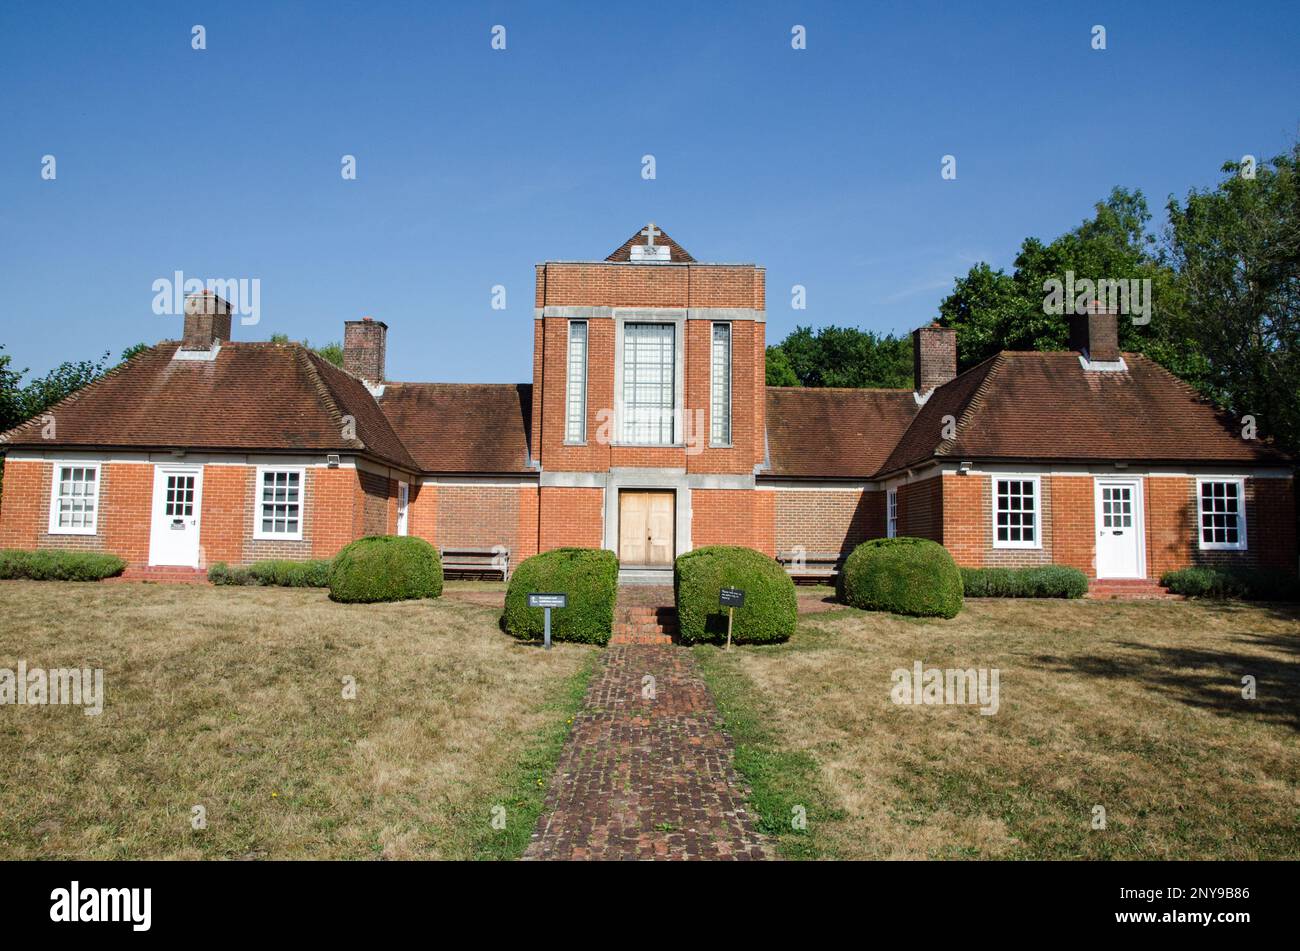 View of the facade of the historic Sandham Memorial Chapel in Burghclere, Hampshire on a sunny summer day.  The Chapel contains paintings by Stanley S Stock Photo